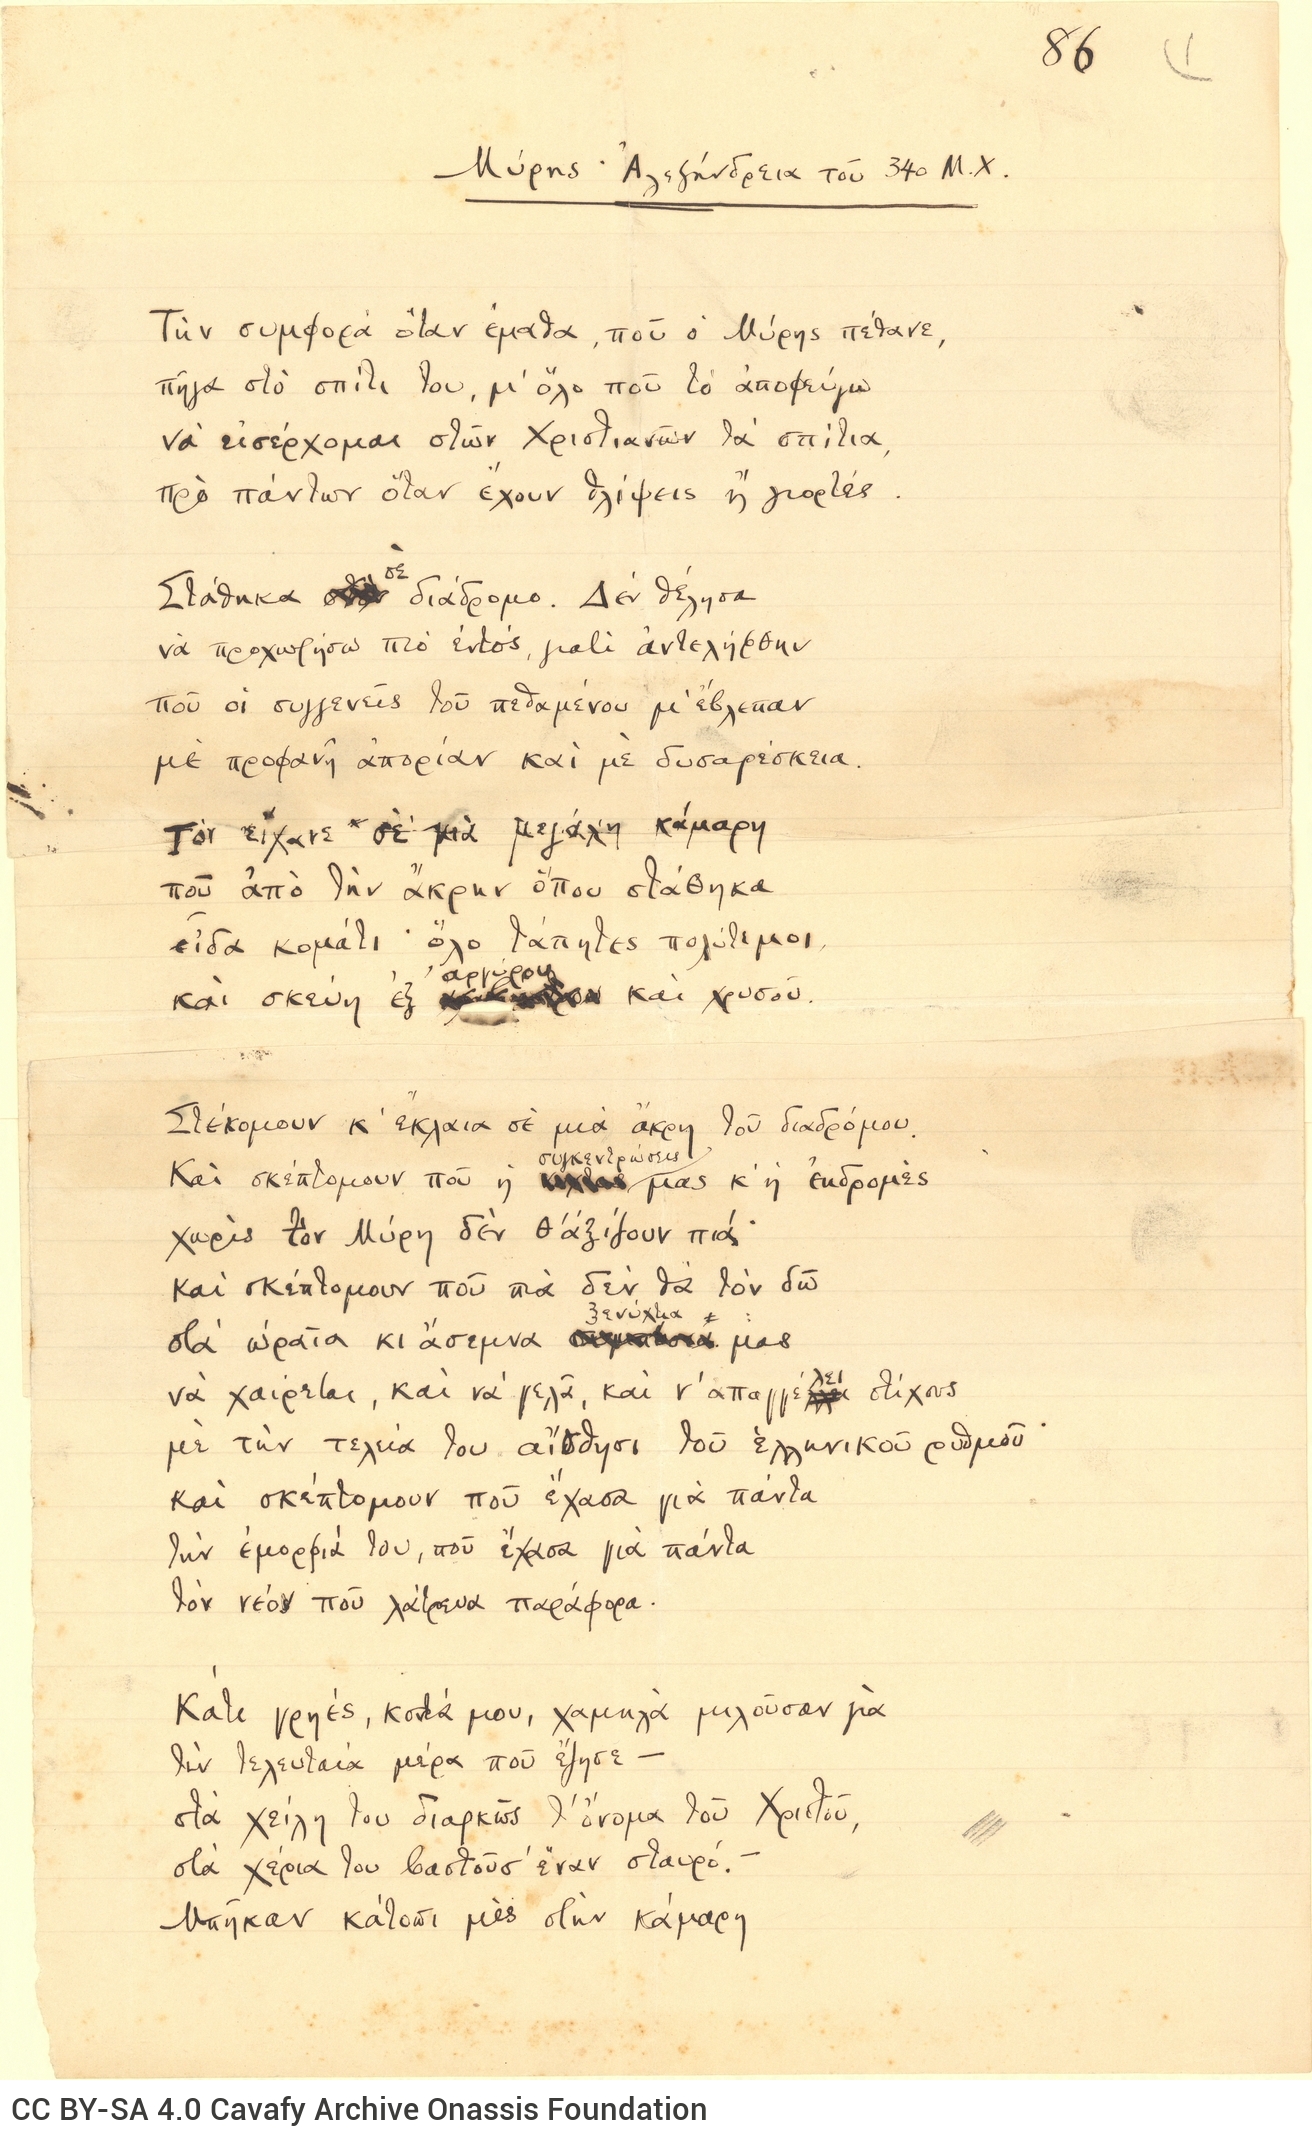 Autograph manuscript of the poem "Myres: Alexandria in 340 A.D." on the recto of three sheets. Cancellations and emendatio